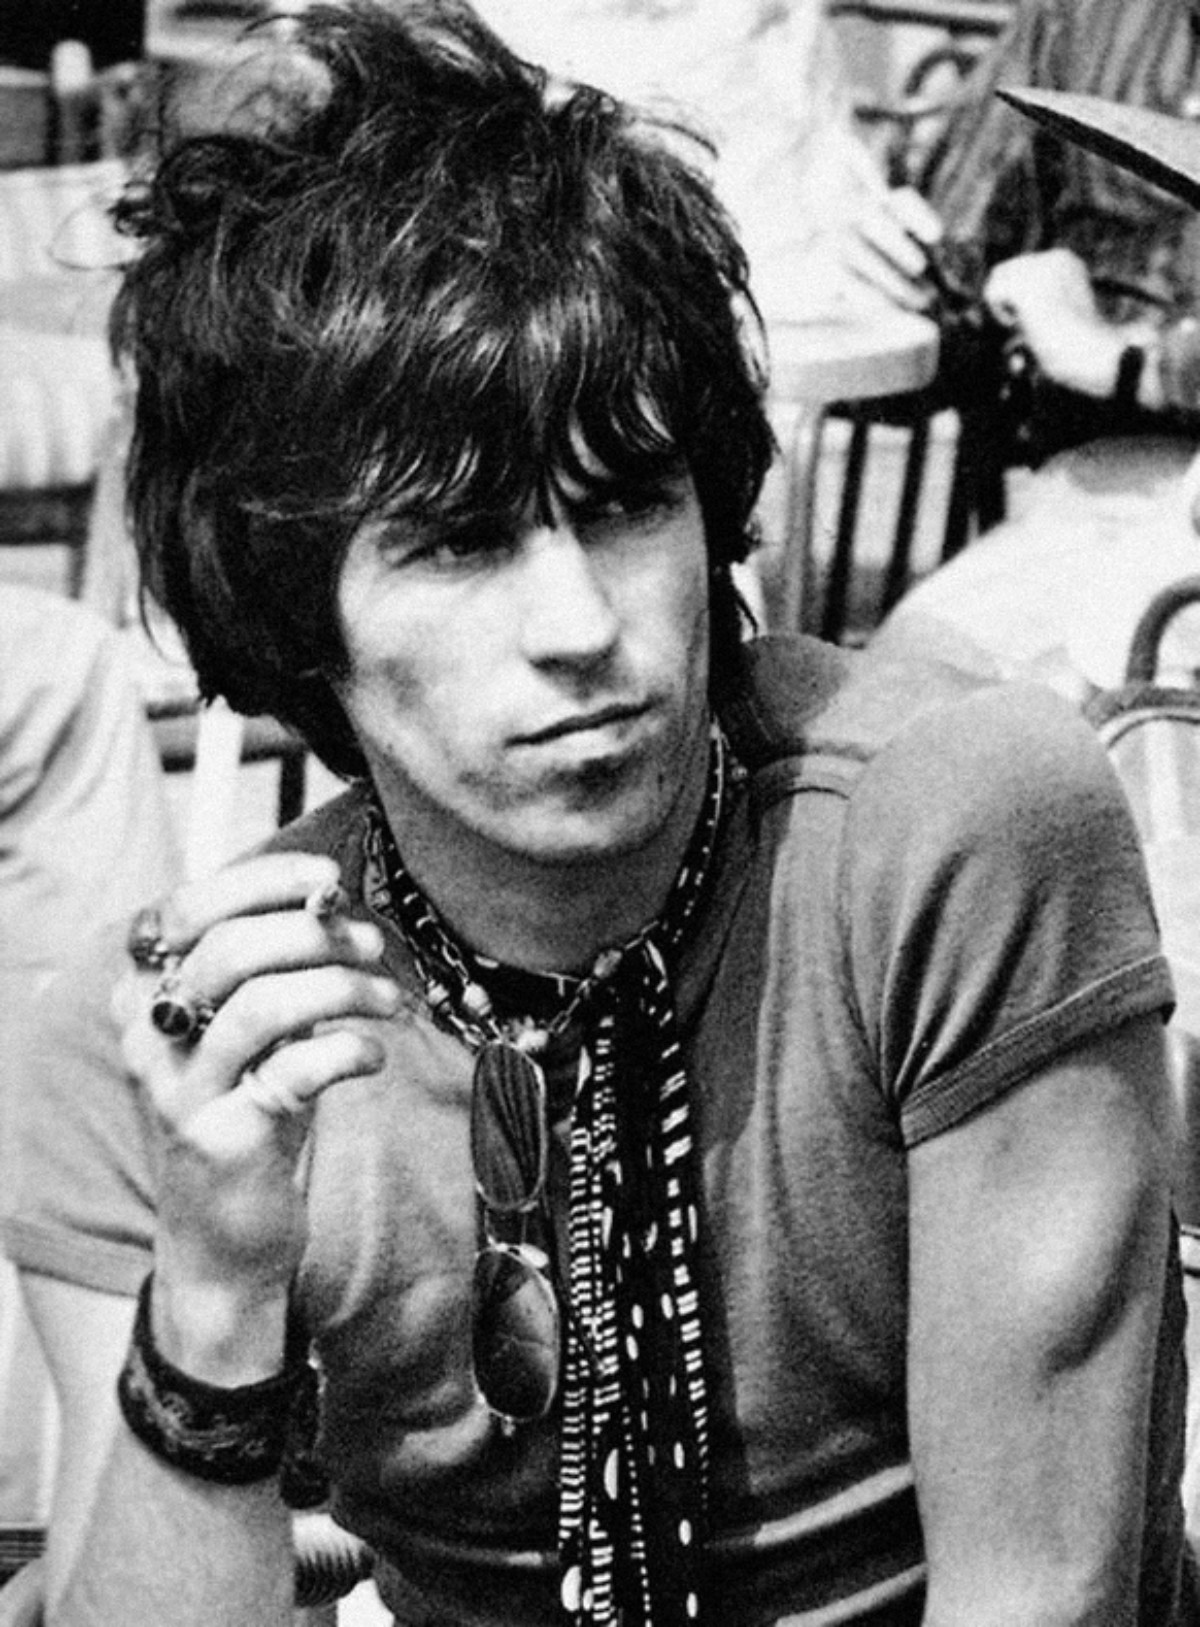 Young Keith Richards...